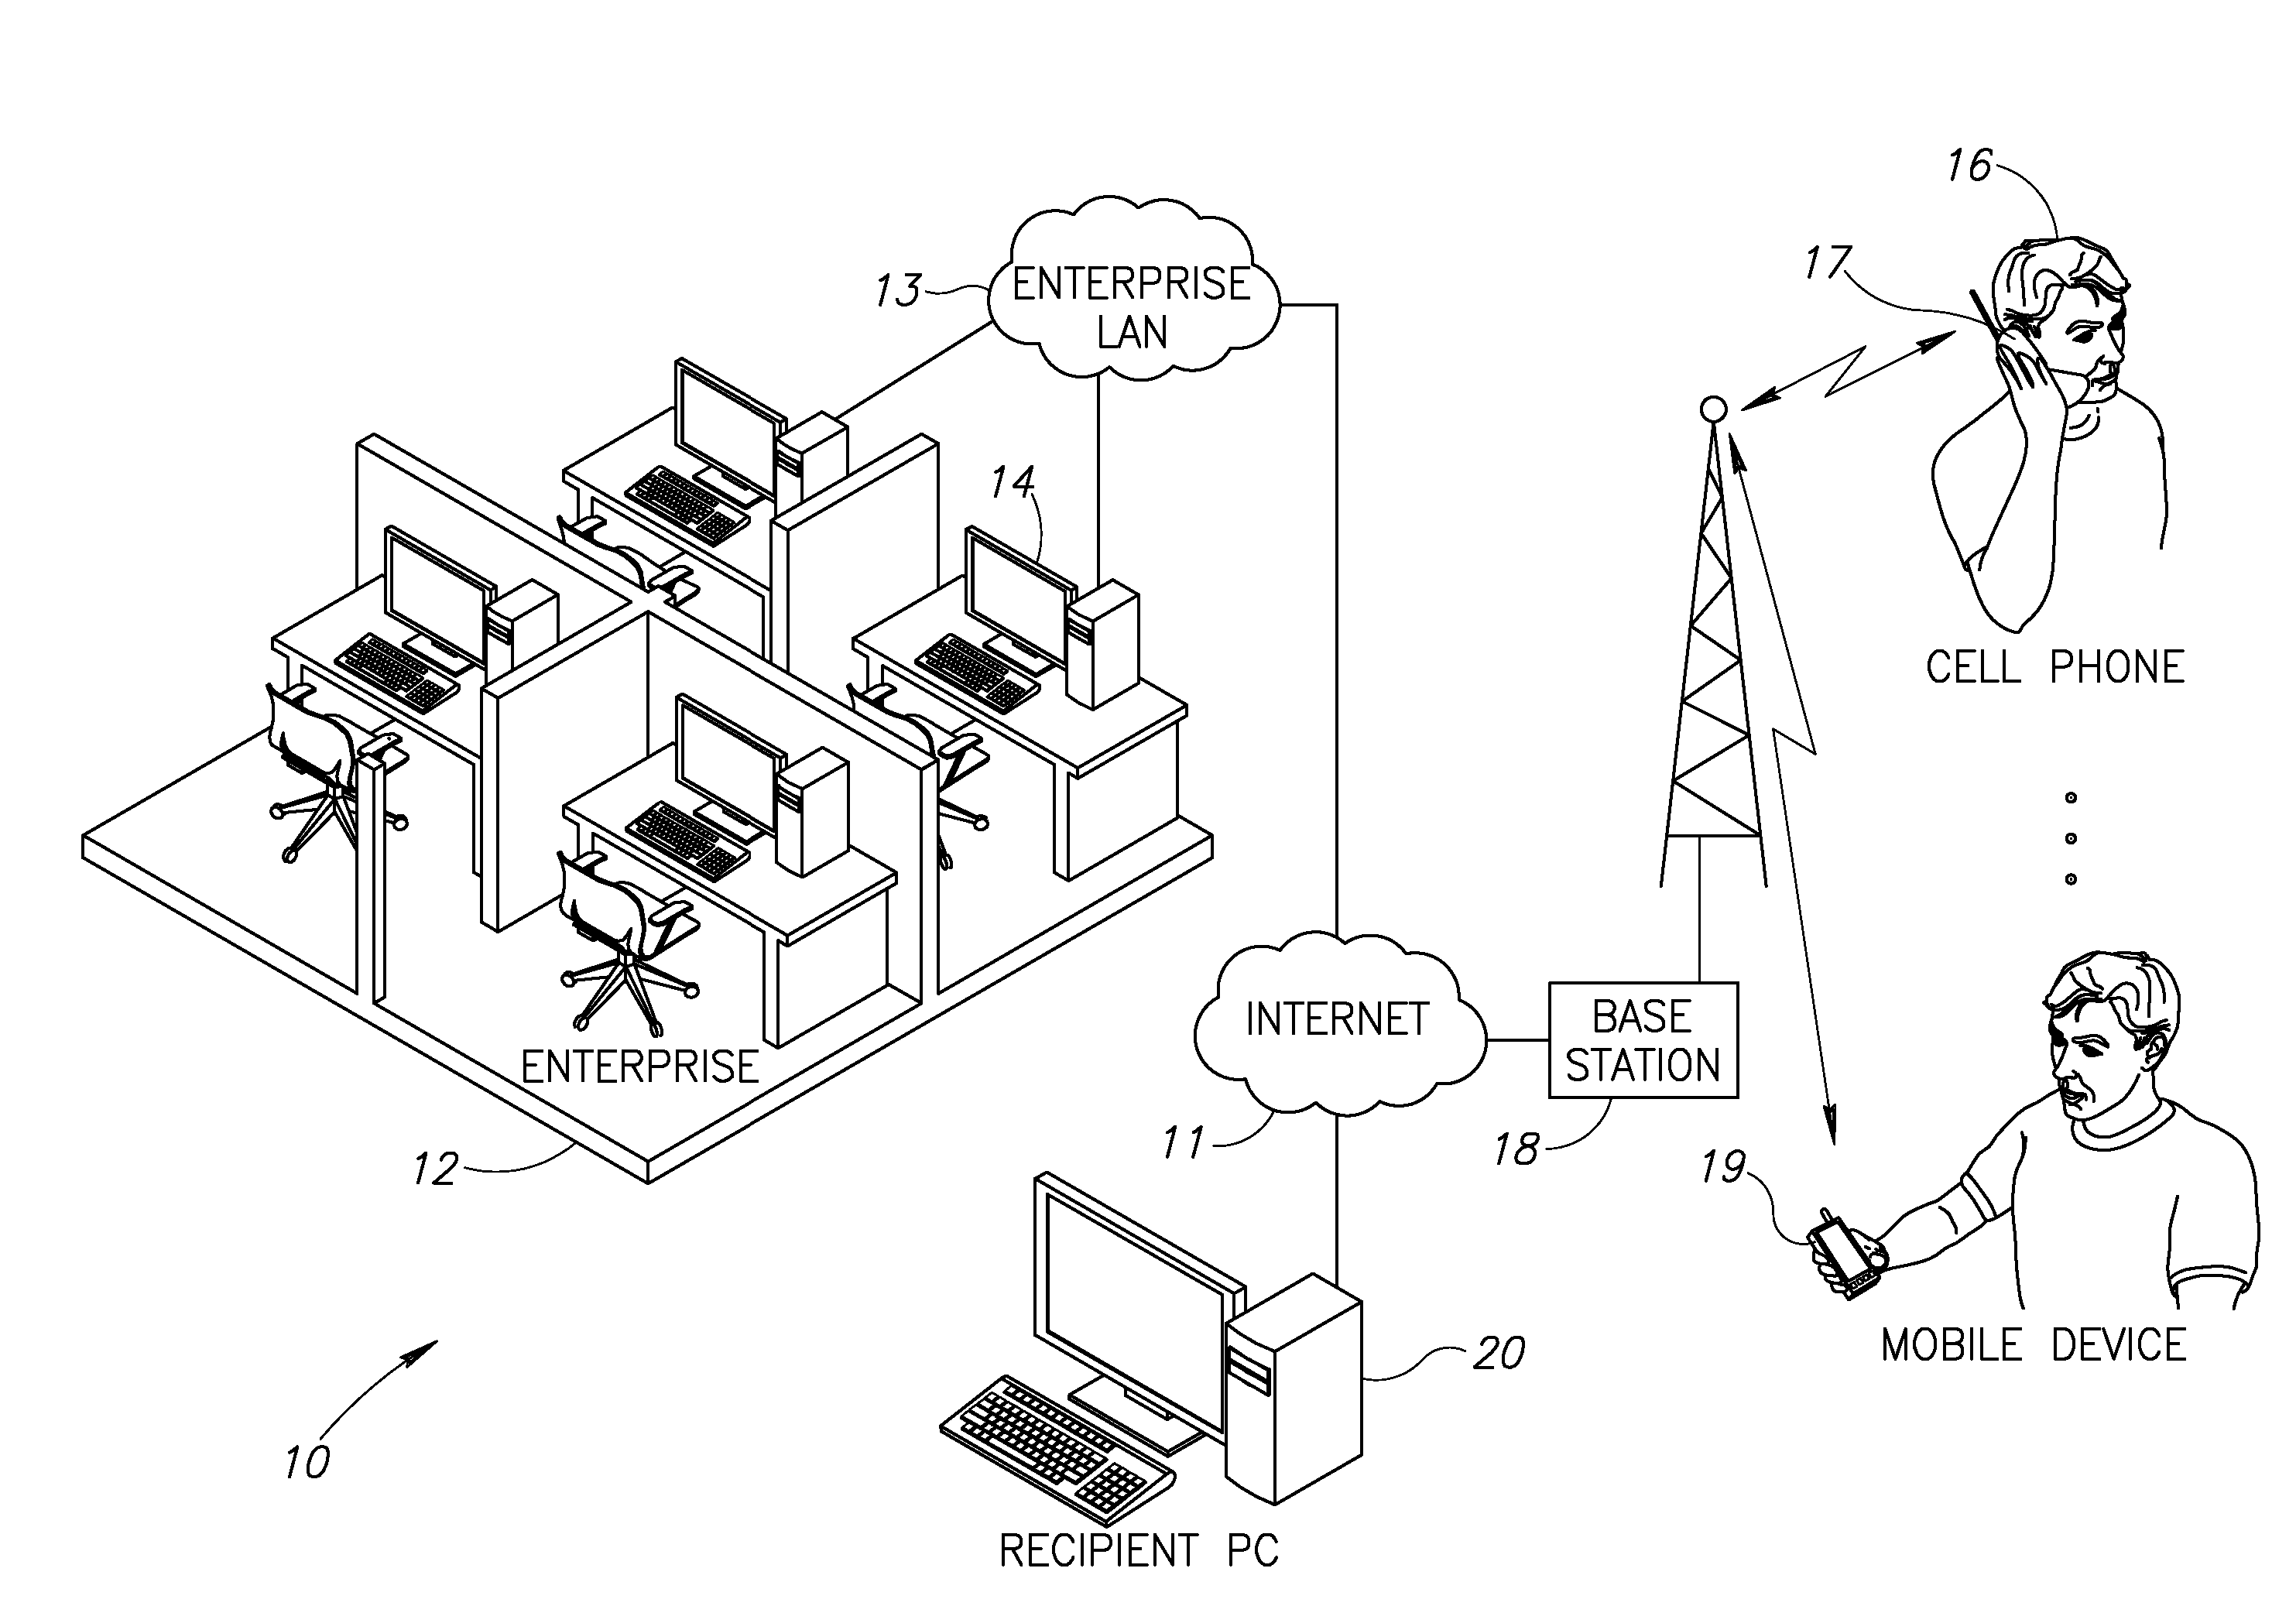 System and method of mobile to desktop document interaction using really simple syndication